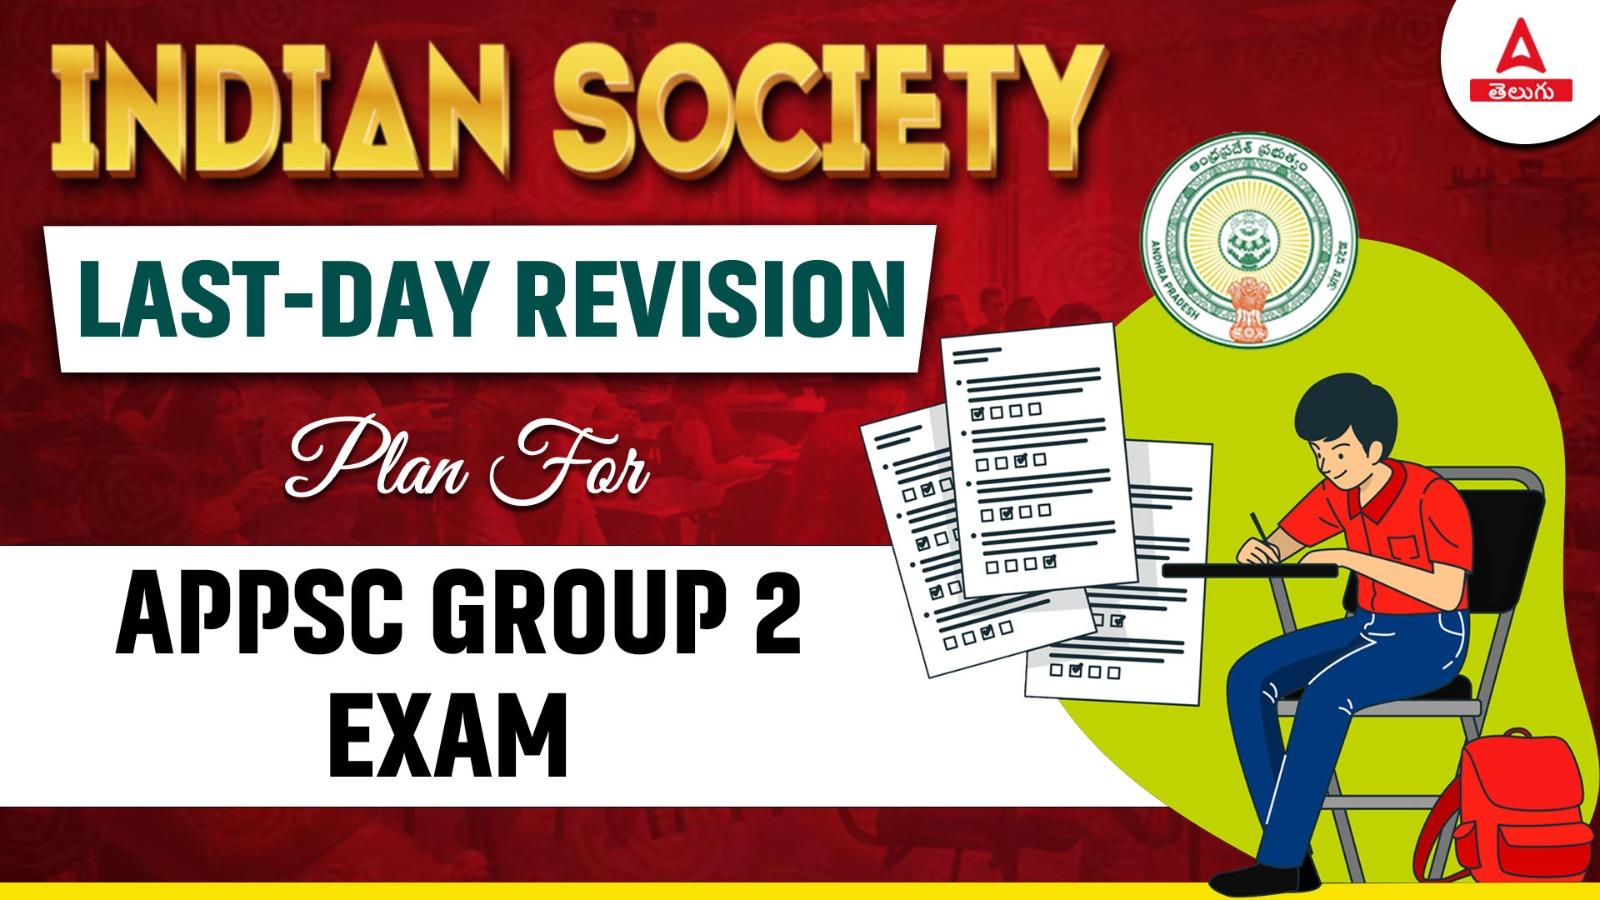 Indian Society Last-Day Revision Plan for APPSC Group 2 Exam-01 (1)